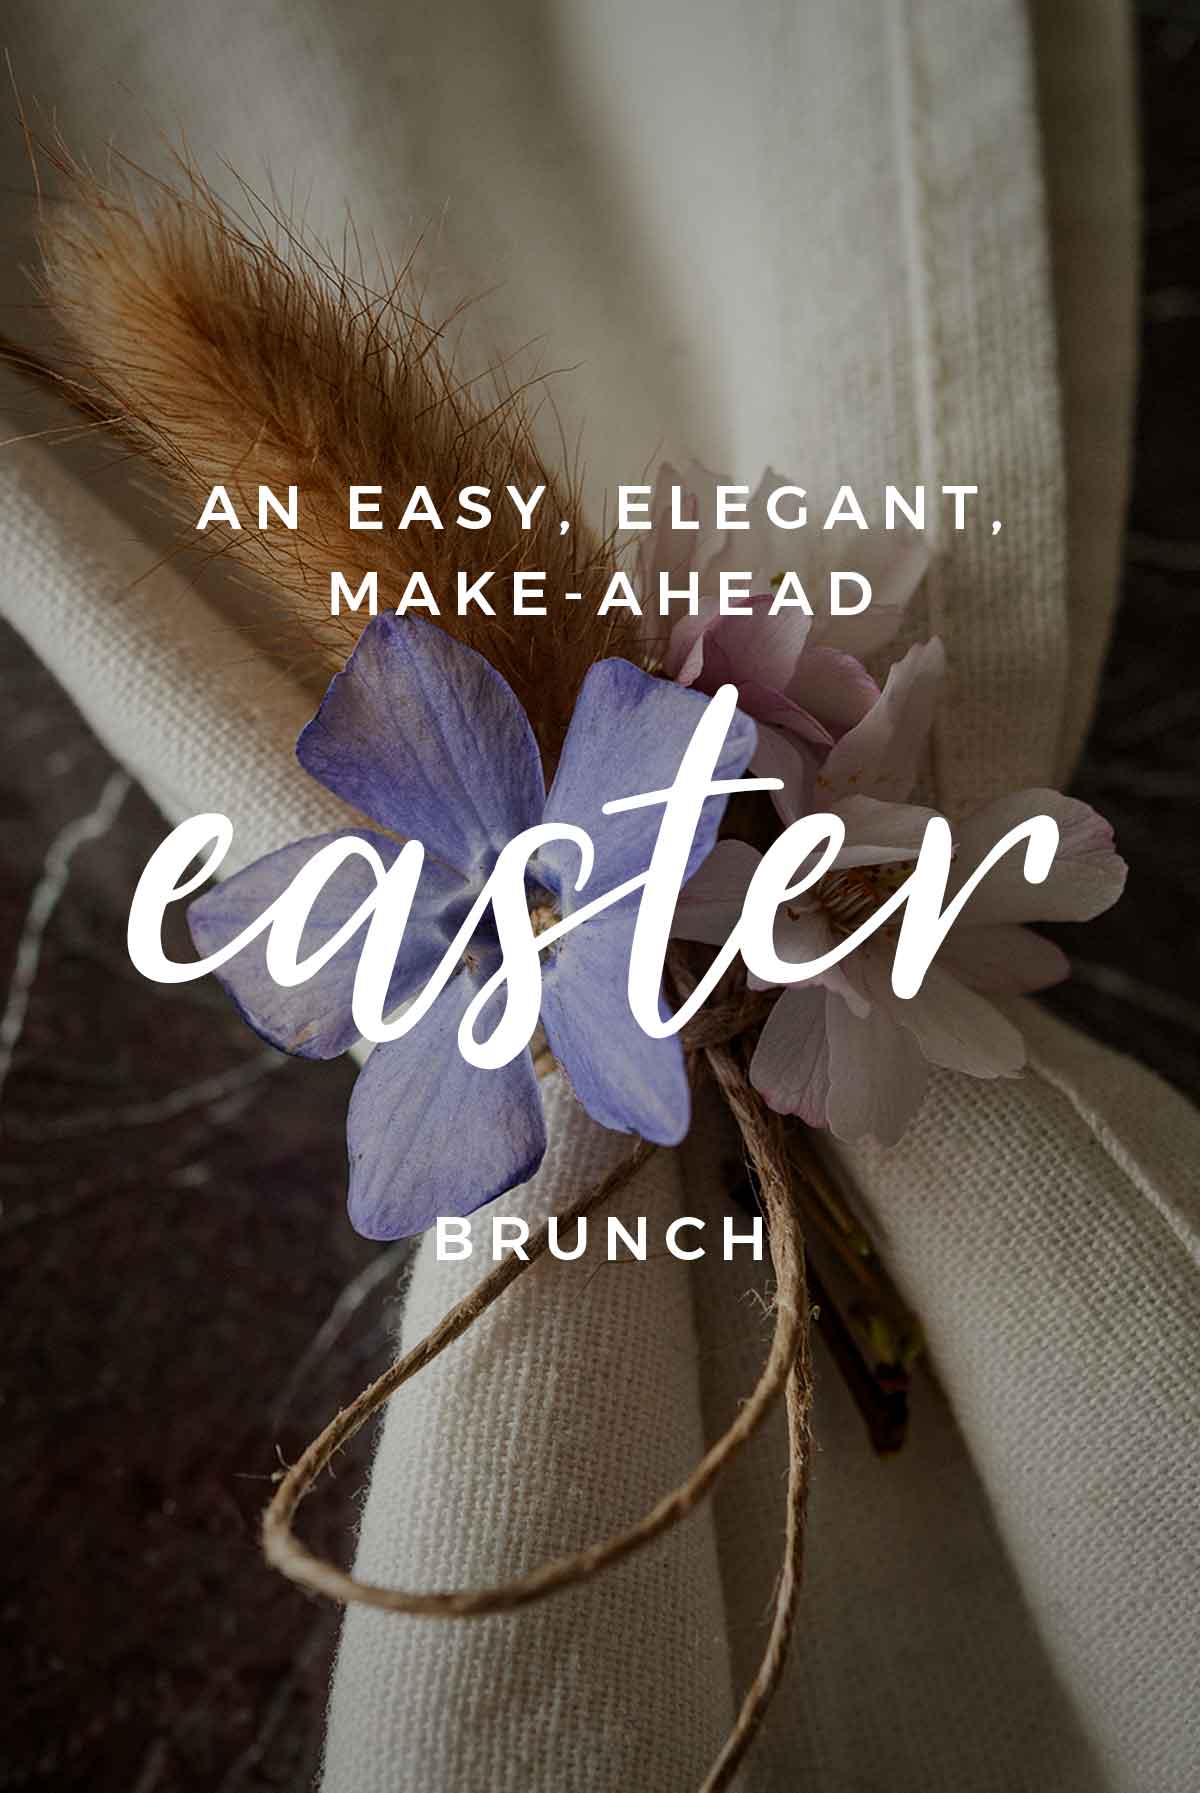 Flowers in a napkin with a title that says "An Easy, Elegant, Make-Ahead Easter Brunch.